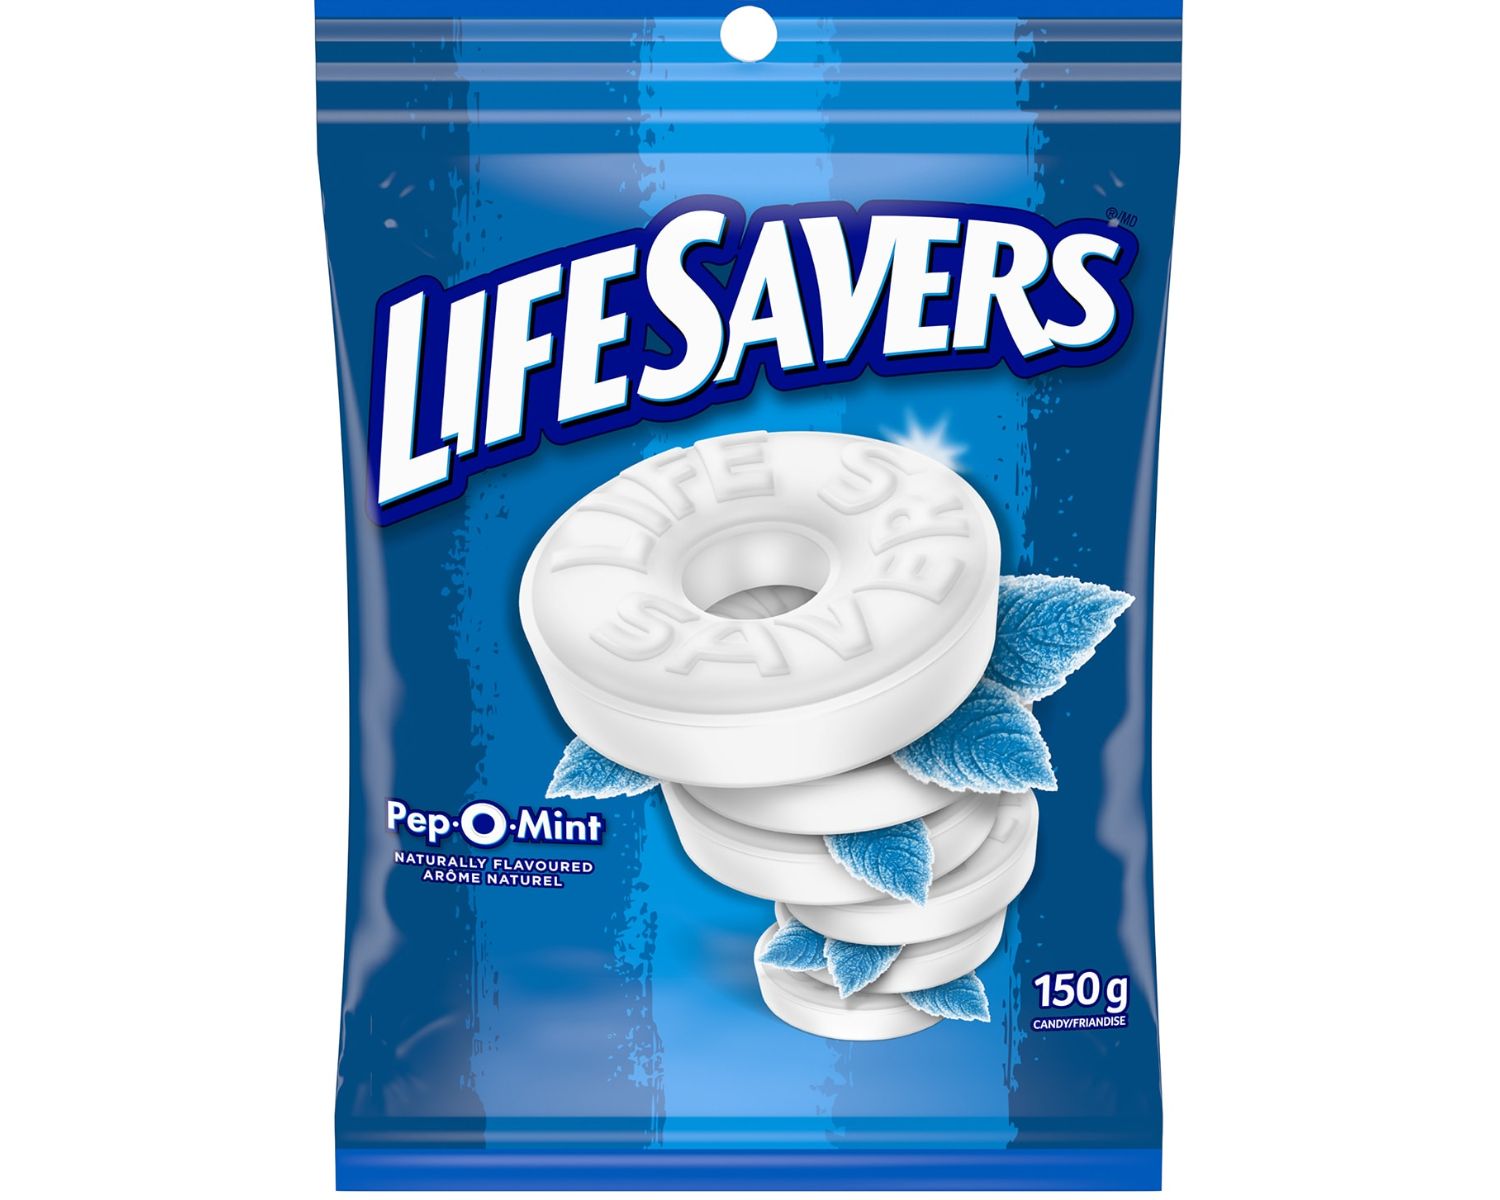 15-lifesavers-pep-o-mint-nutrition-facts